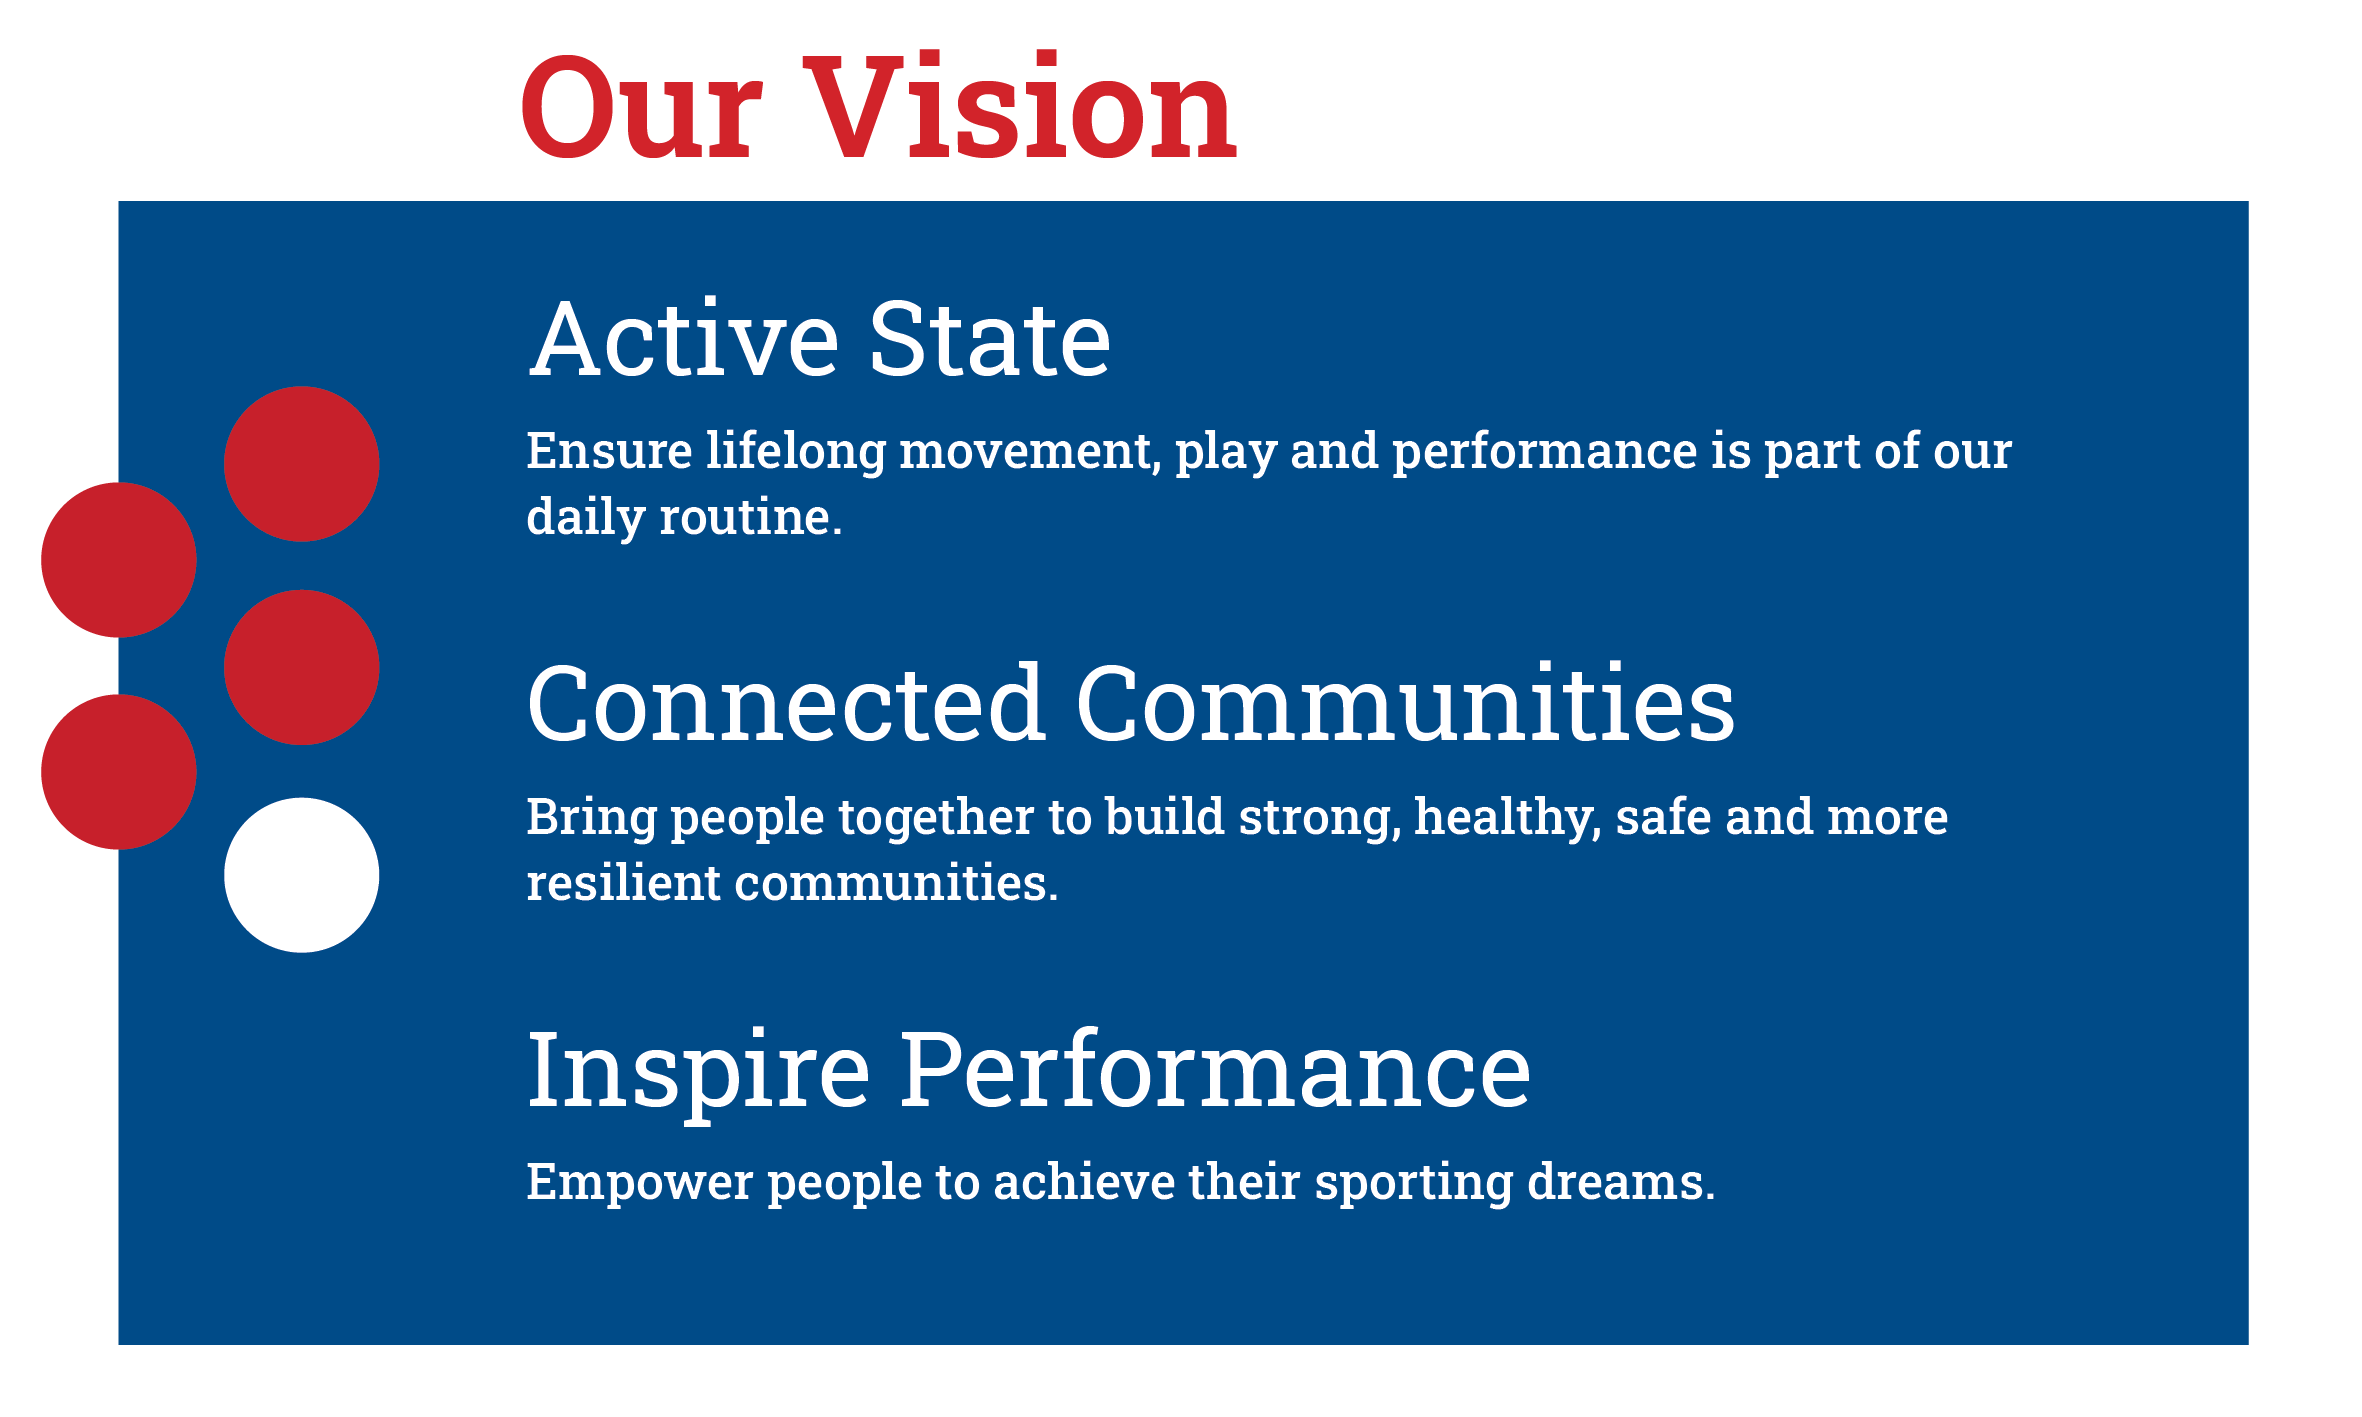 Active State, Connected Communities, Inspire Performance